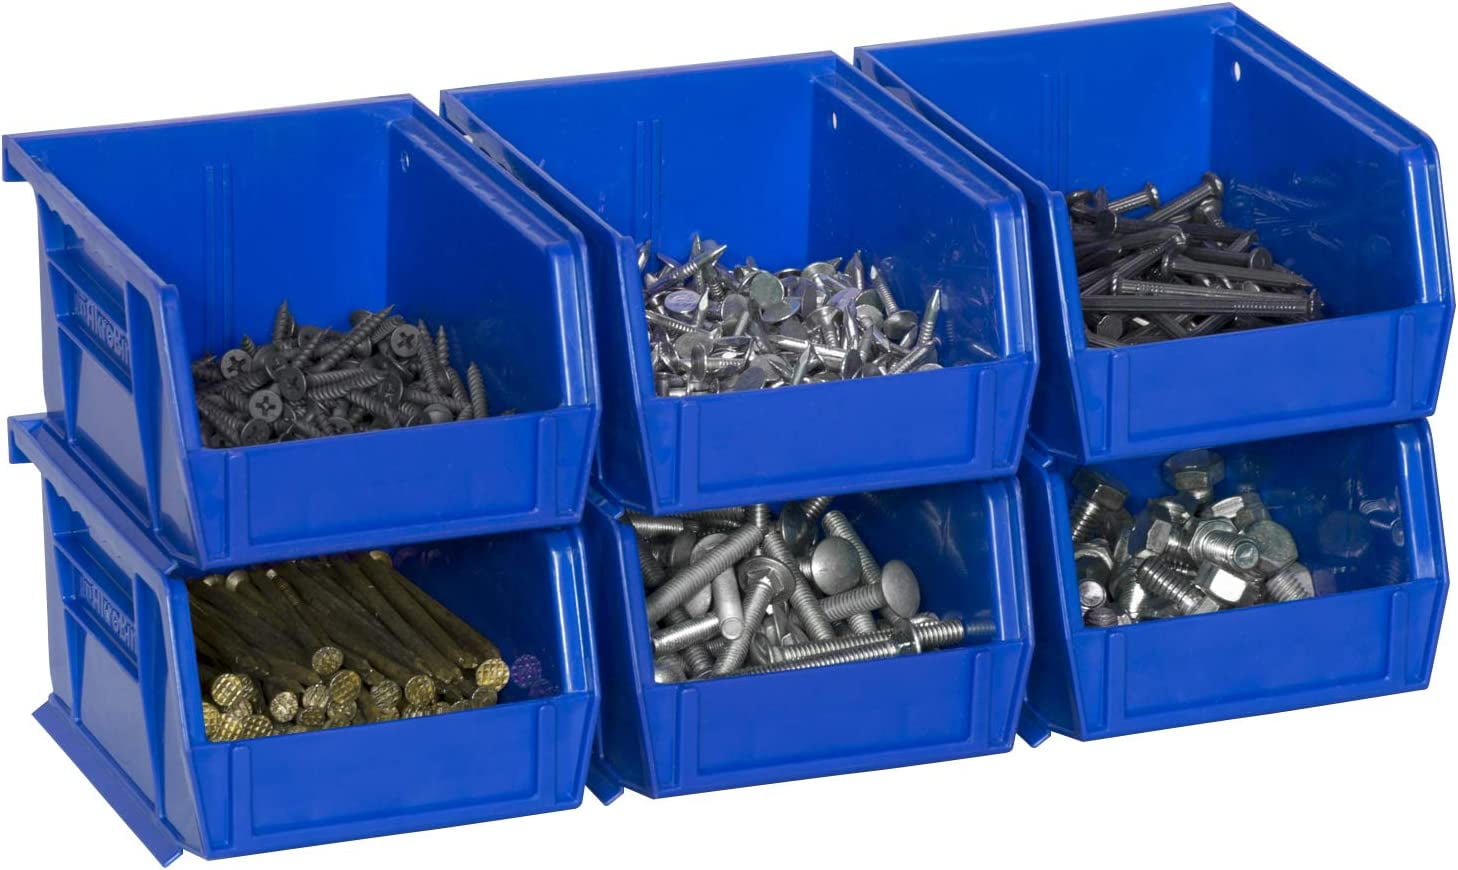 High Strength Plastic Storage Bins for Nails and Screws - China